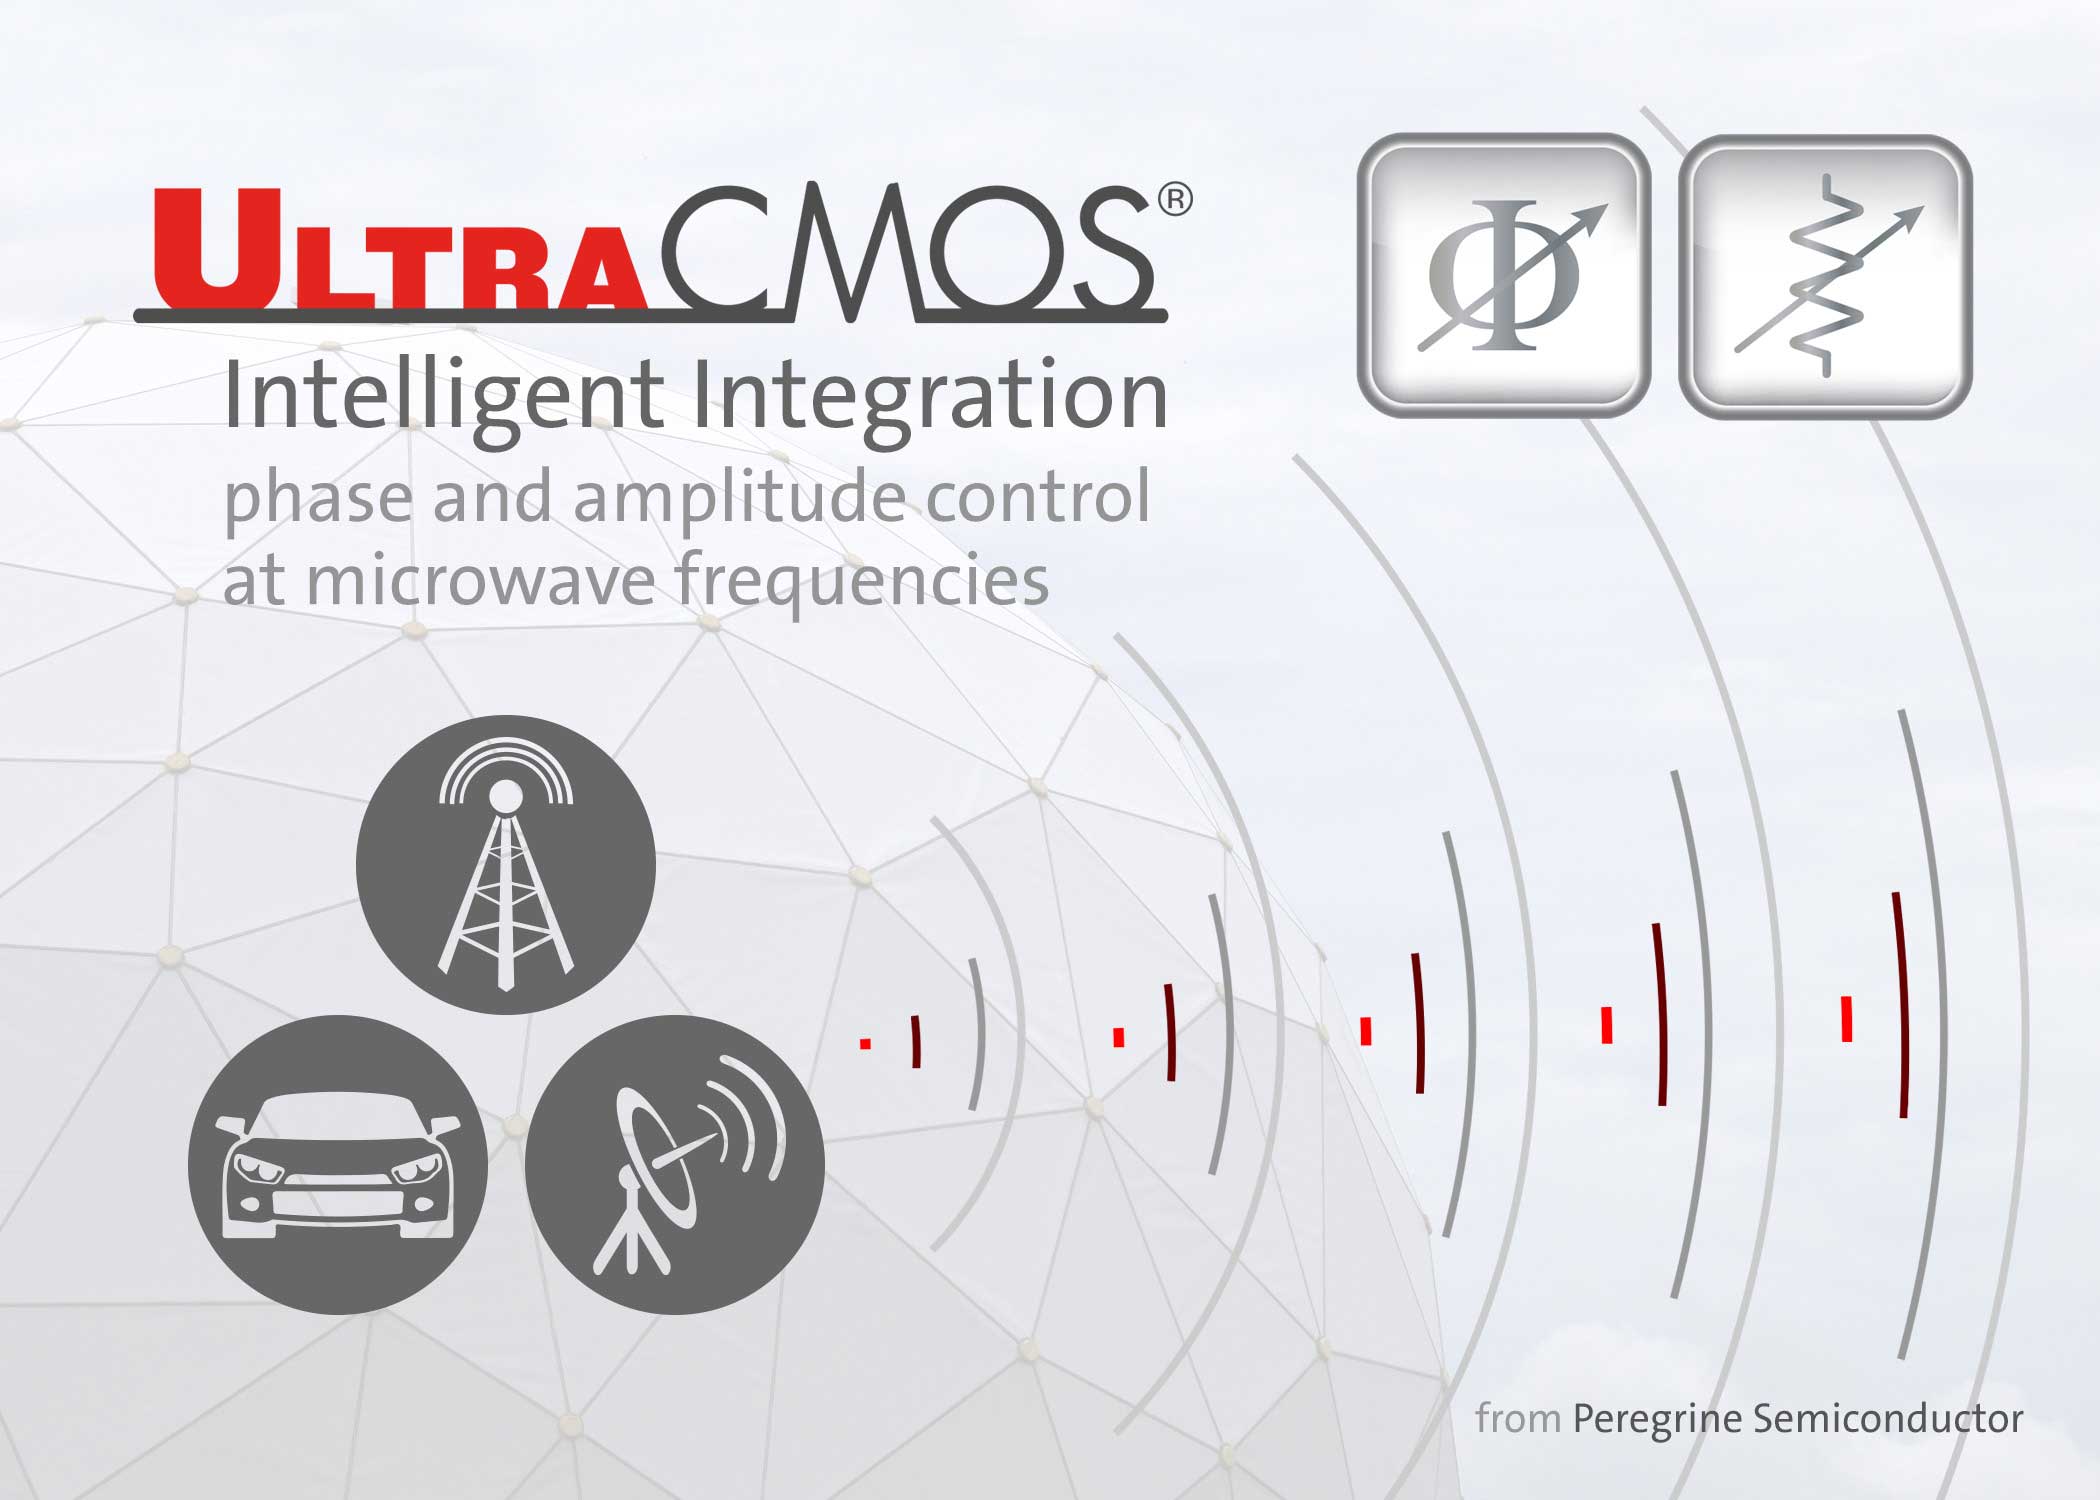 From LTE to 5G, Peregrine's intelligent integration will enable phase and amplitude control at microwave frequencies.